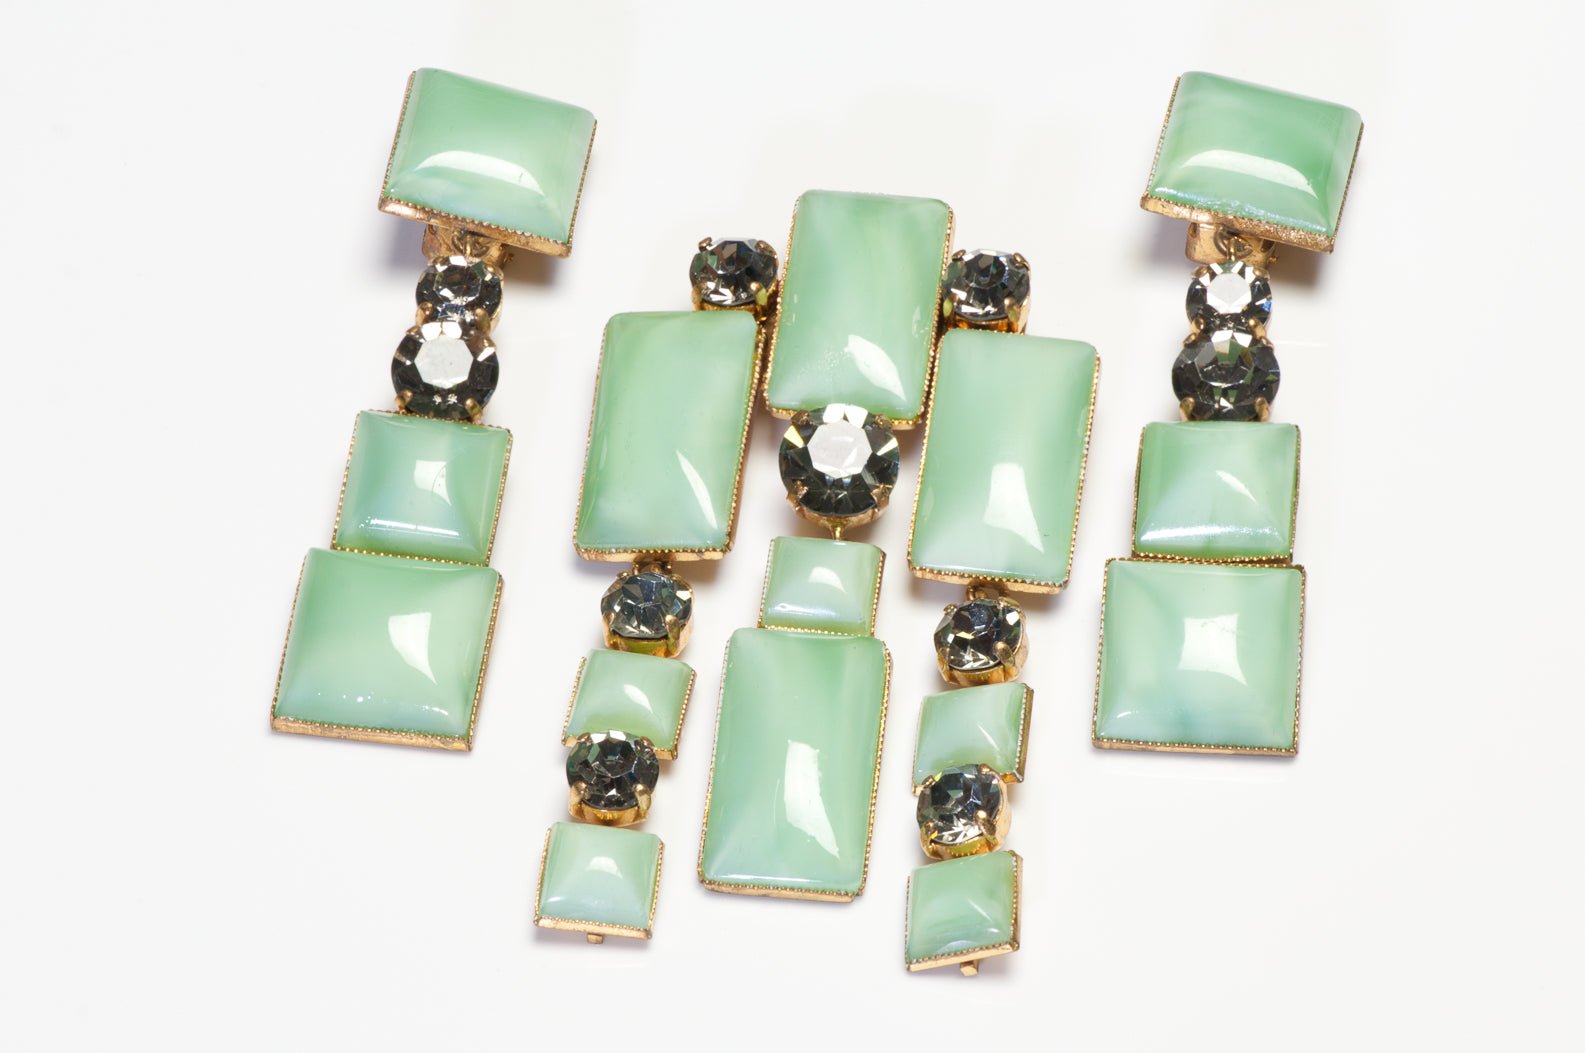 Pierre Cardin Couture 1950's Green Poured Glass Crystal Brooch Earrings Set